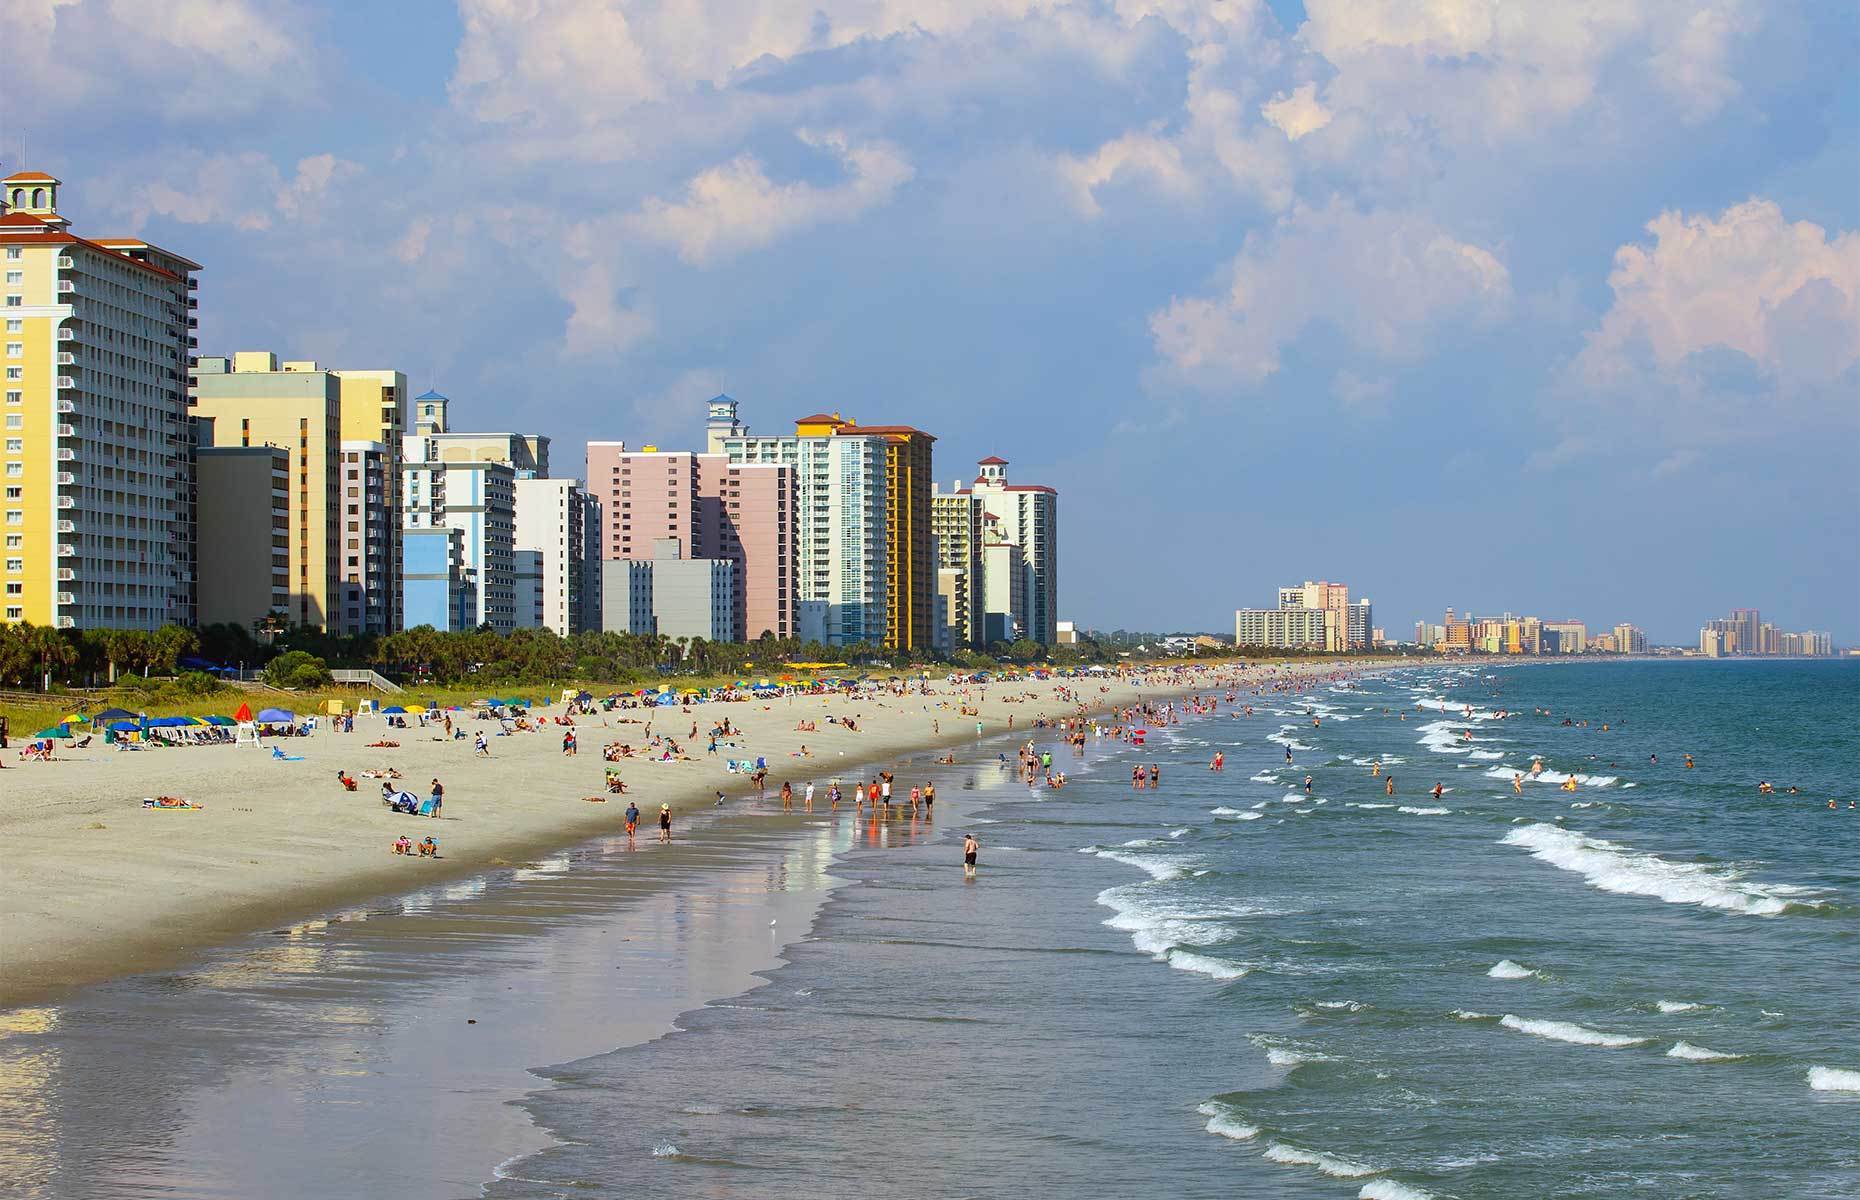 <p class="p1"><span>Myrtle Beach’s white sands stretch for over <a href="https://voyage.caaquebec.com/en/destinations/north-america/myrtle-beach/" rel="noreferrer noopener"><span>one hundred kilometres</span></a>. Indulge in long walks beside crashing waves or take in a round at one of the 120 nearby <a href="https://www.playgolfmyrtlebeach.com/courses/" rel="noreferrer noopener"><span>golf courses</span></a>.</span></p>